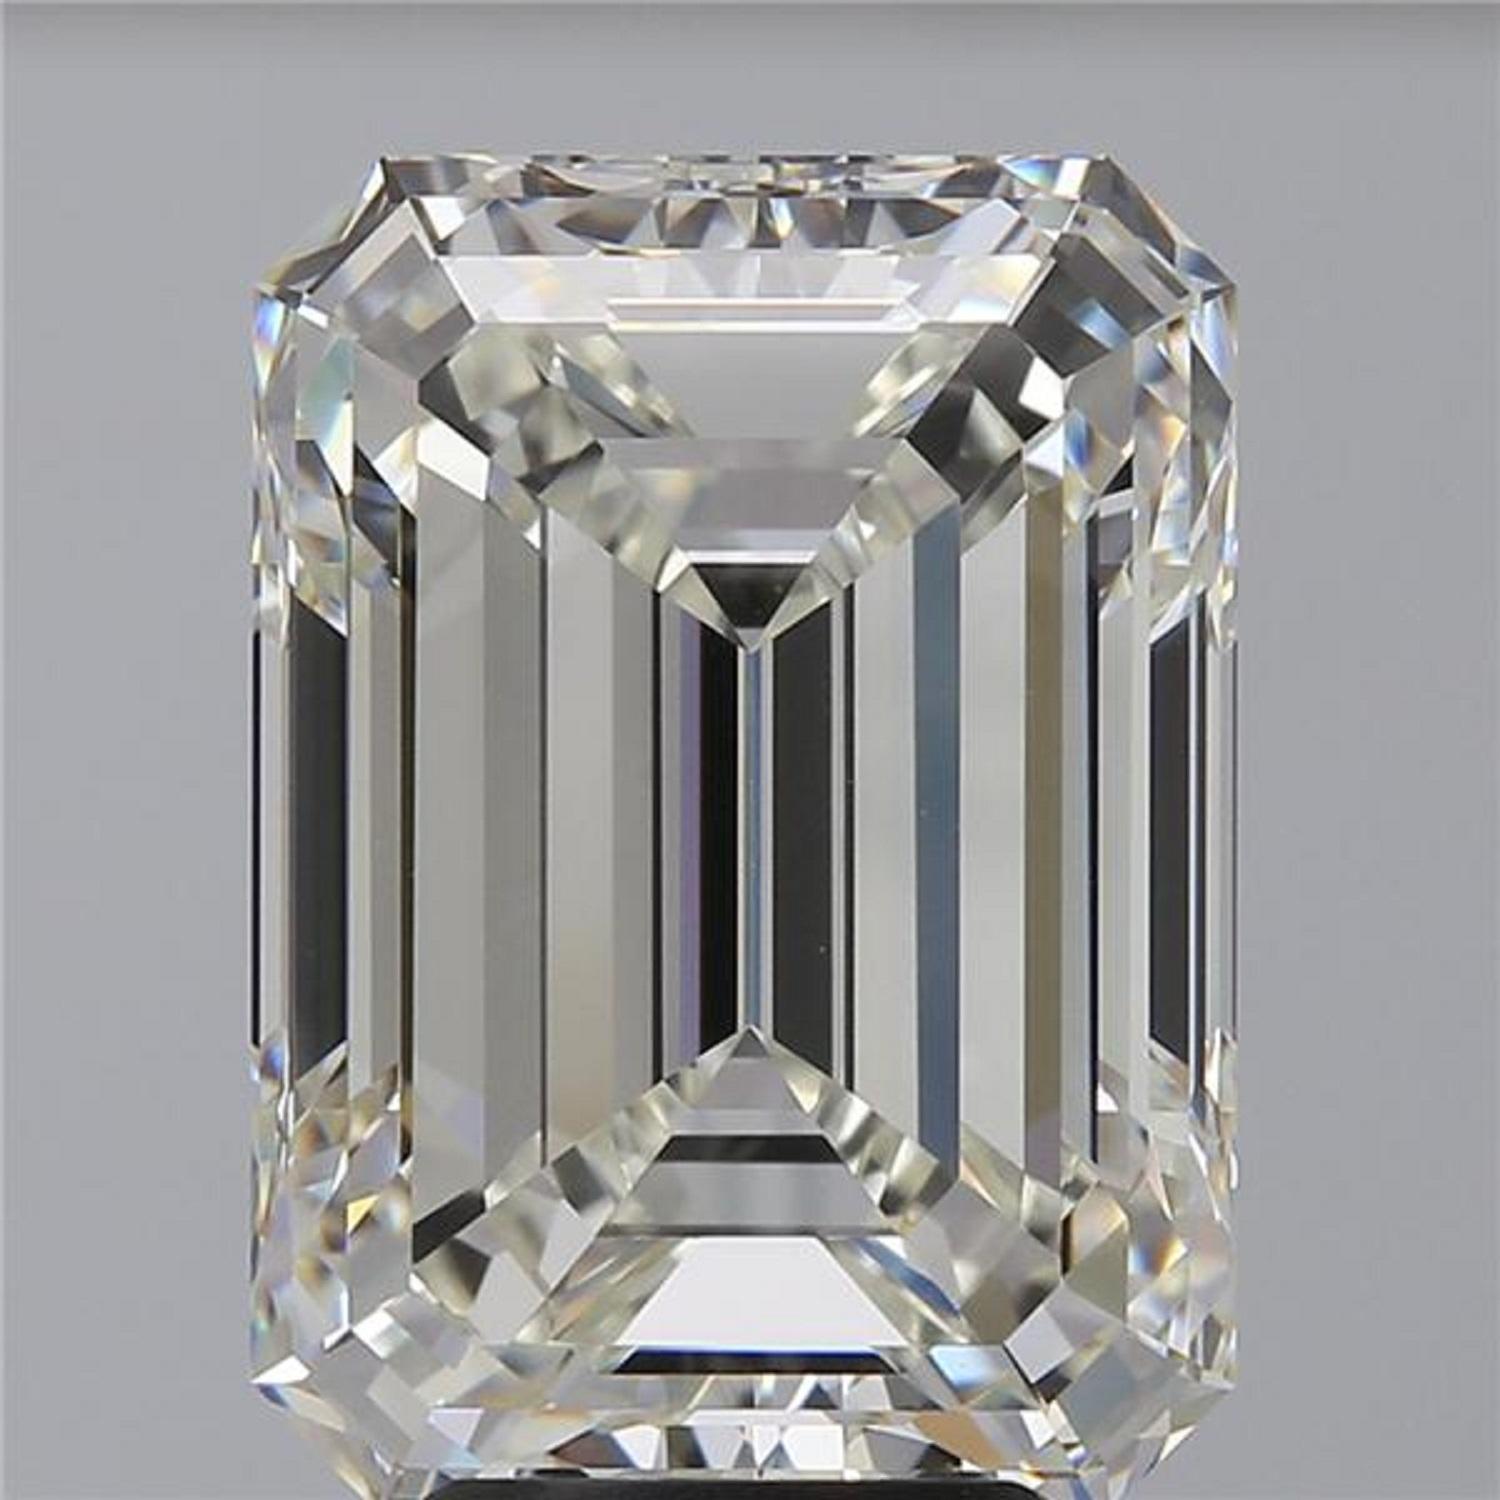 With an extra certificate this diamond is for investment purposes